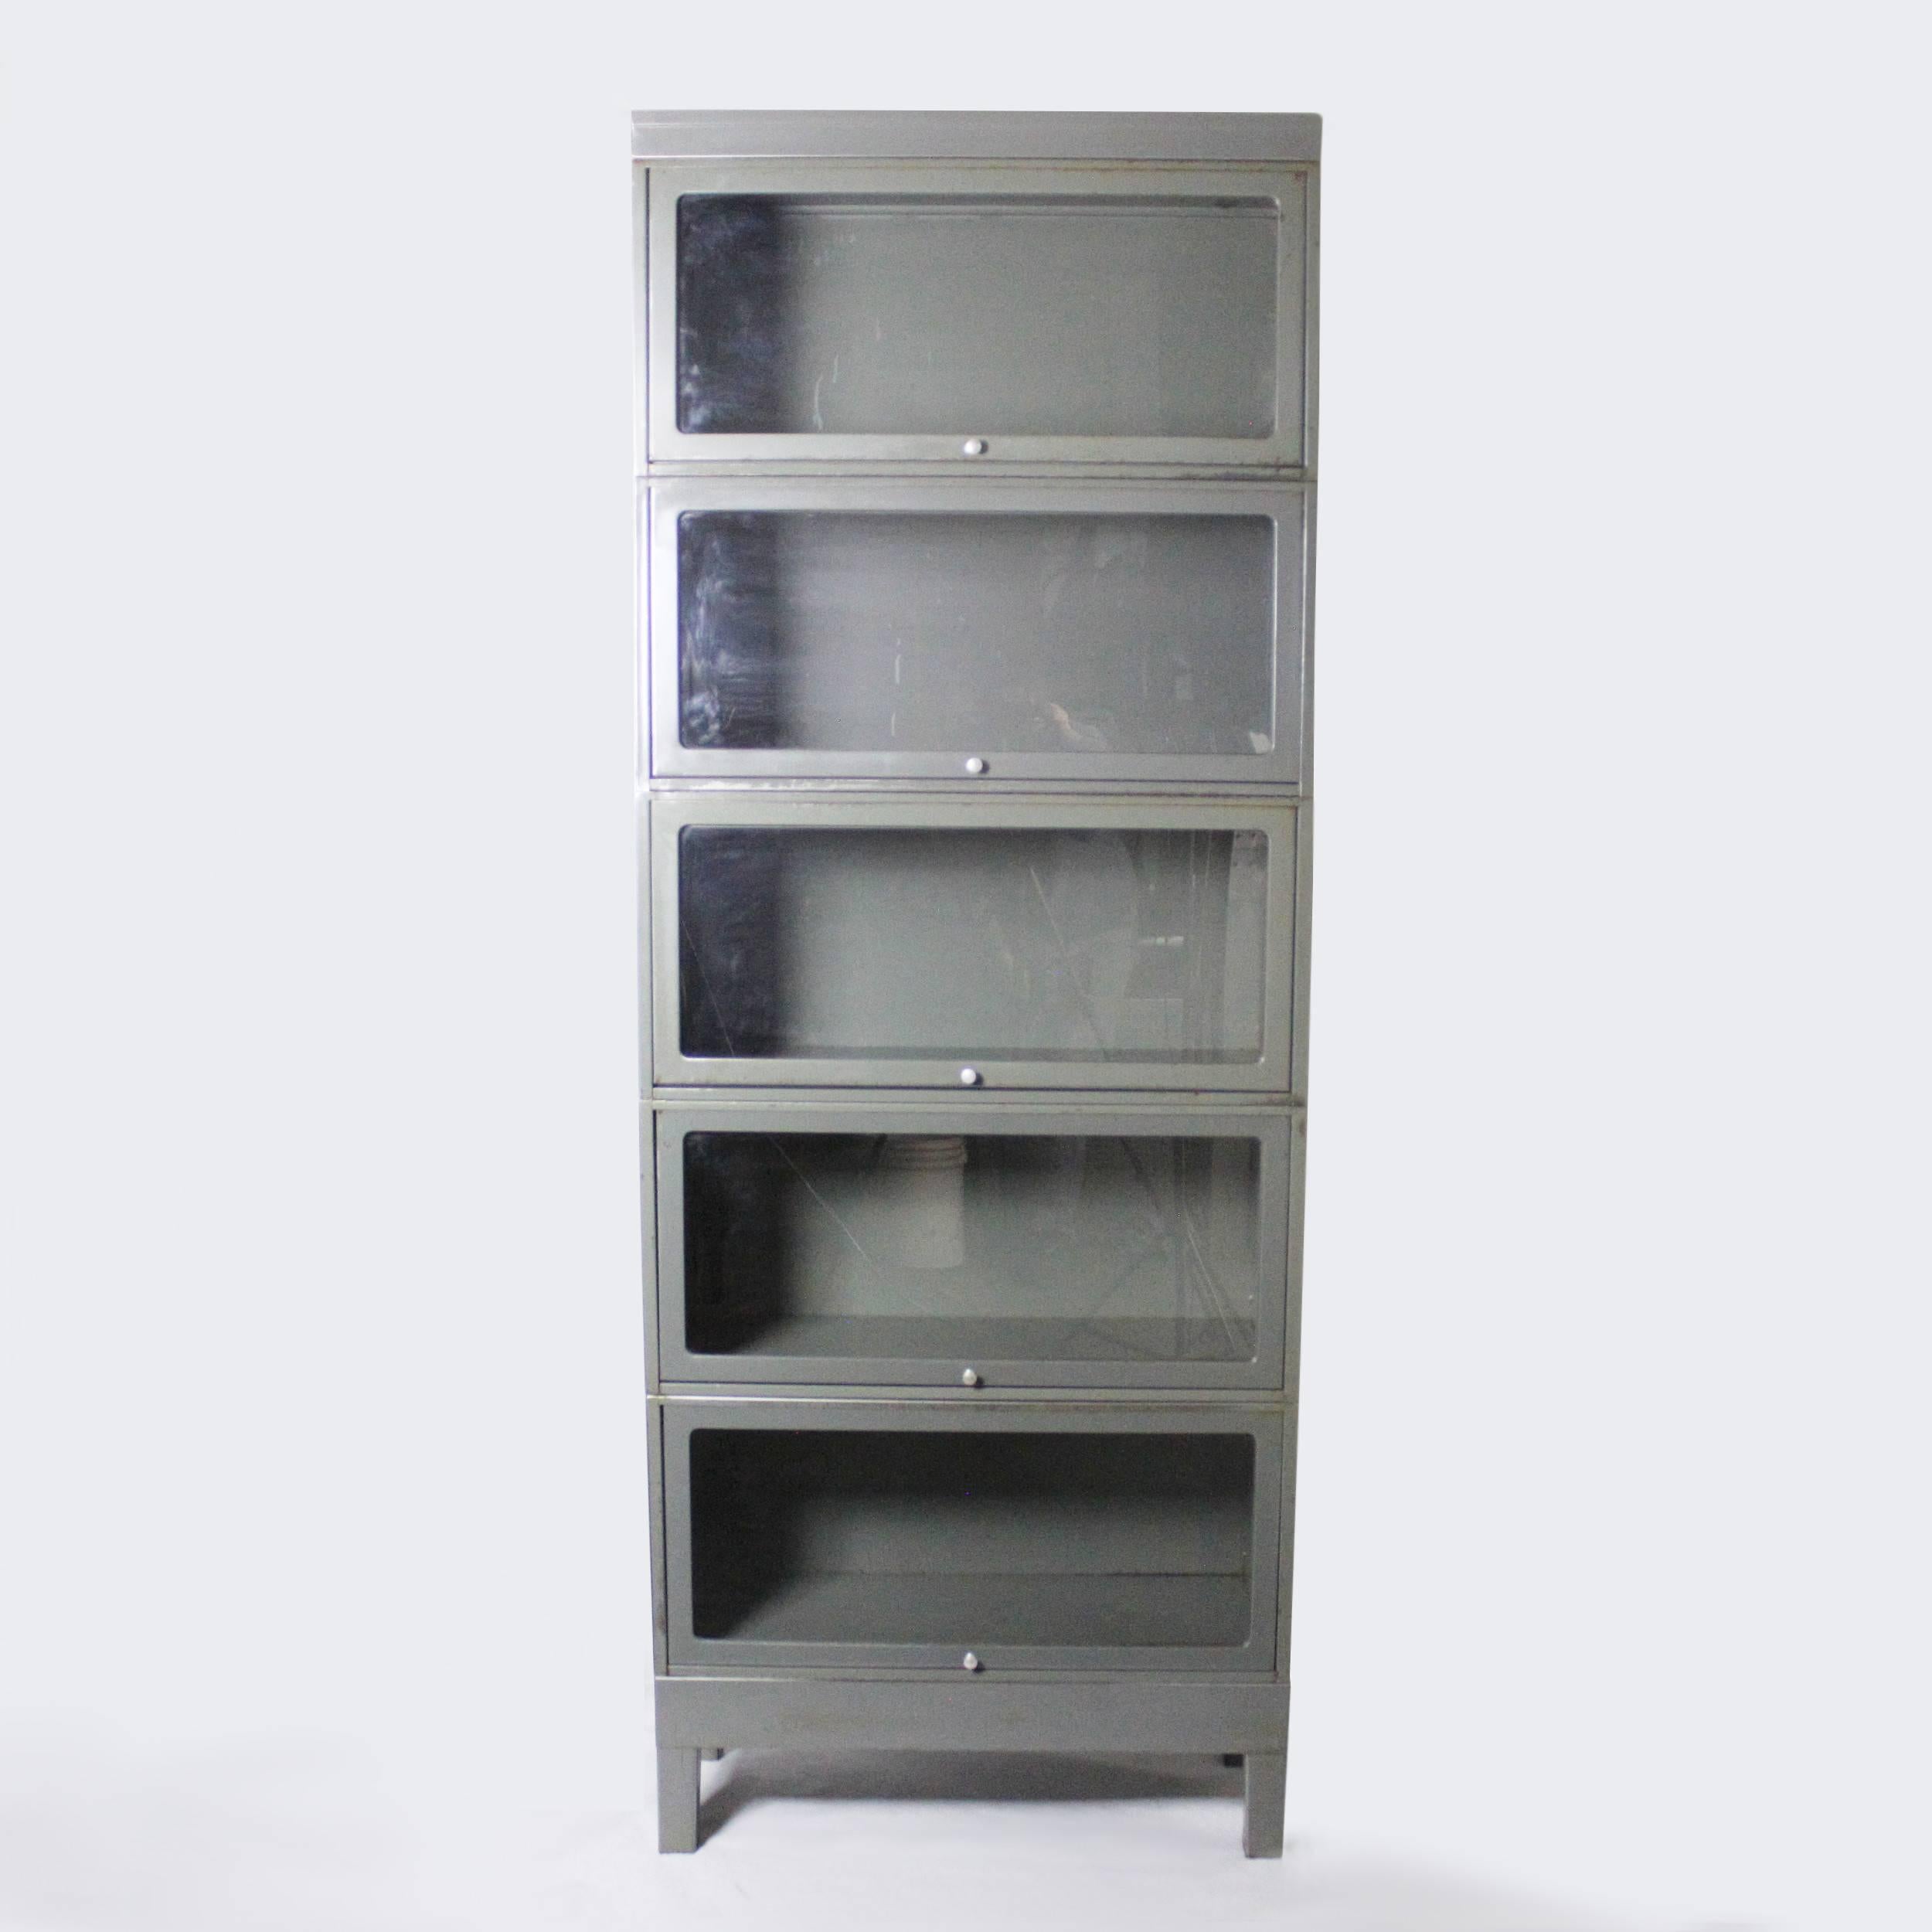 Fantastic vintage metal barrister bookcase. Bookcase stands over 7 feet tall and features a great Industrial patina to its original gray paint, steel construction, aluminium hardware, and clear, crack-free glass. Would add some impressive Industrial